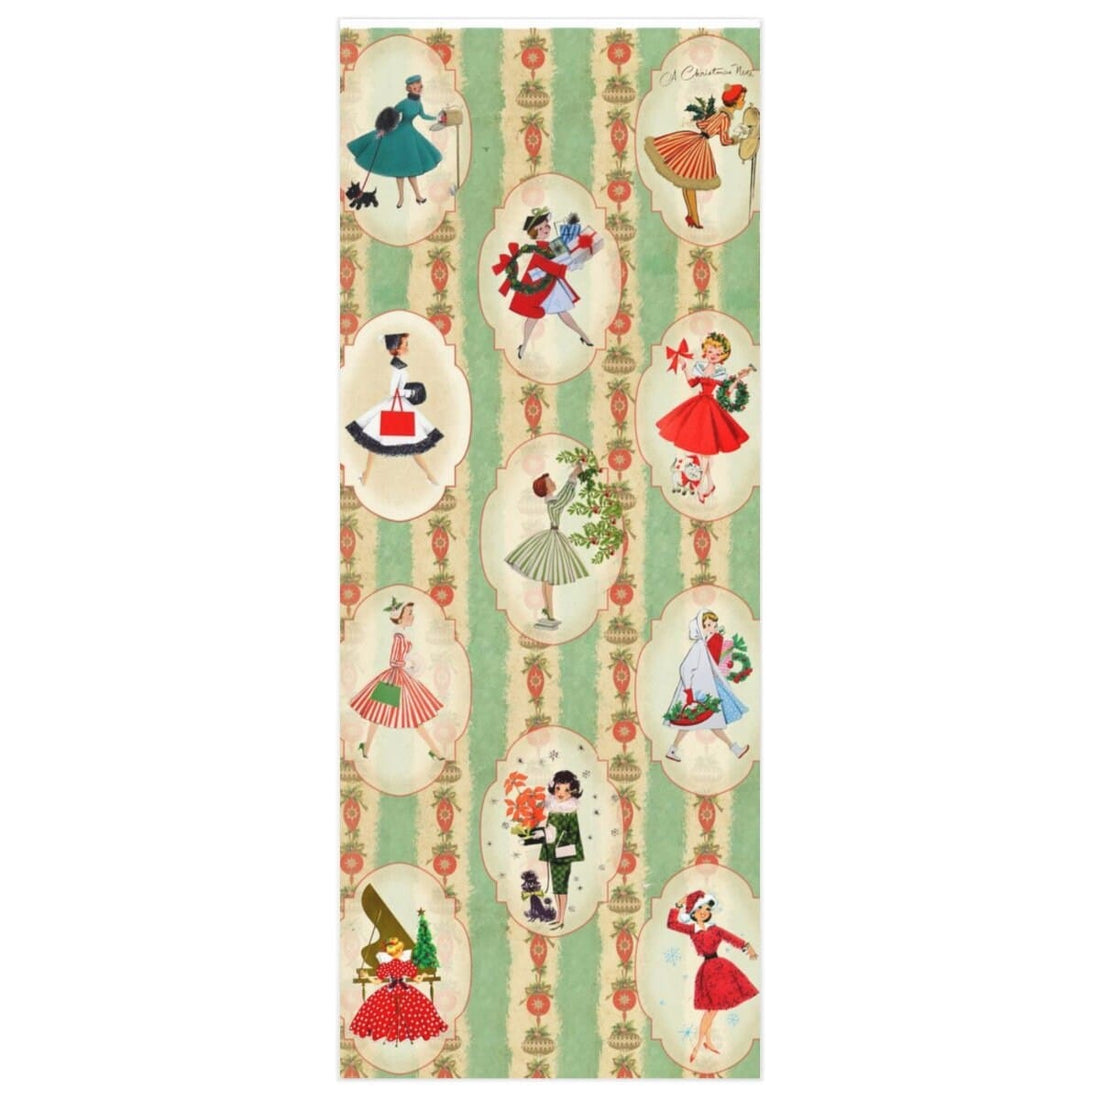 Kate McEnroe New York Vintage 1950s Christmas Wrapping Paper, Mid Century Modern Retro Green, Red, Women, Ladies, Housewives Holiday Gift WrapWrapping Paper18454133583151462566